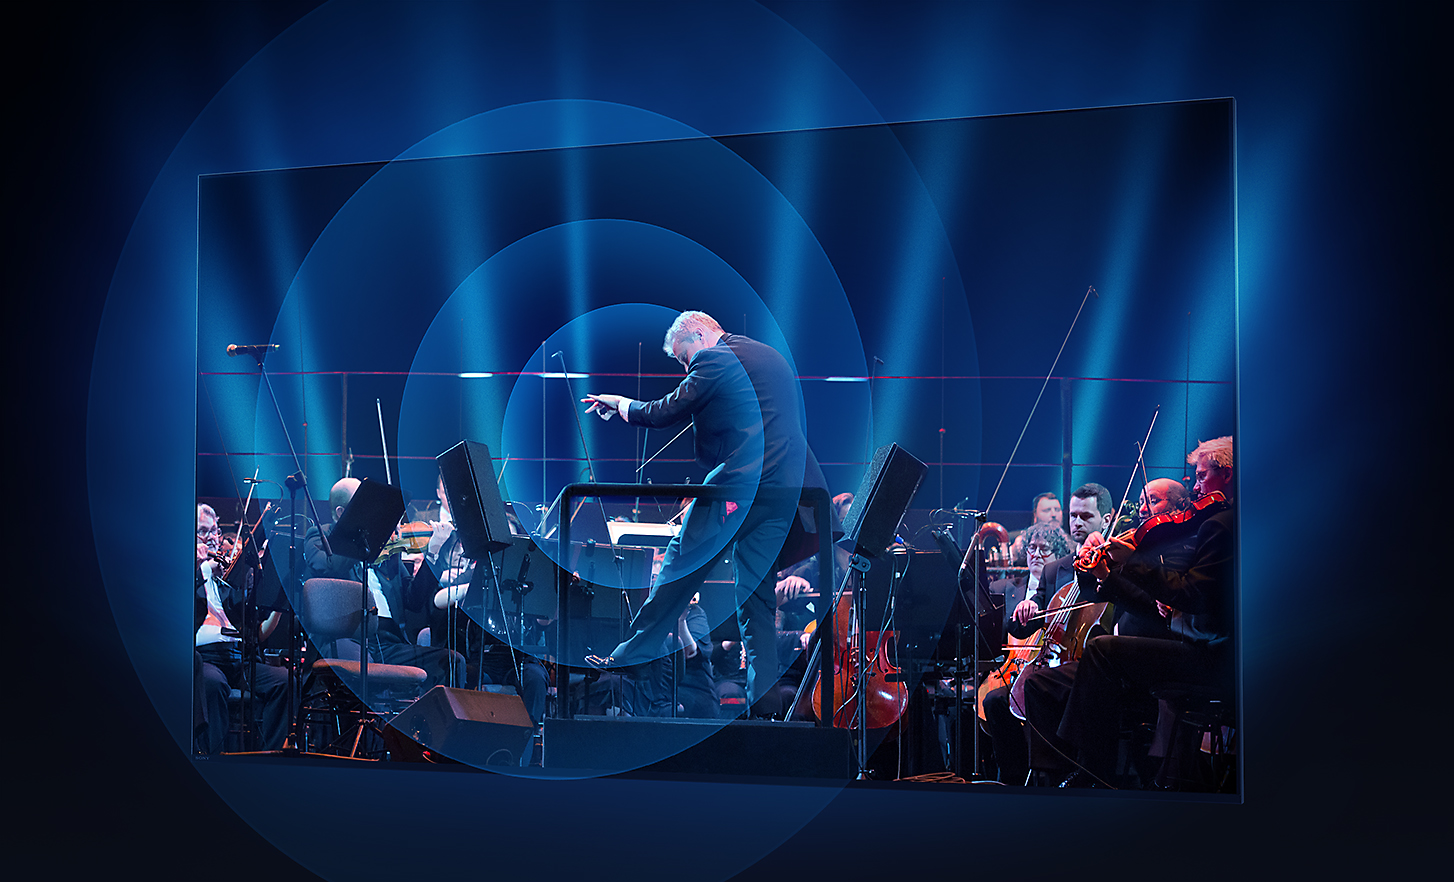 BRAVIA TV screen showing conductor and orchestra with sound waves radiating out in concentric rings from the centre of the screen